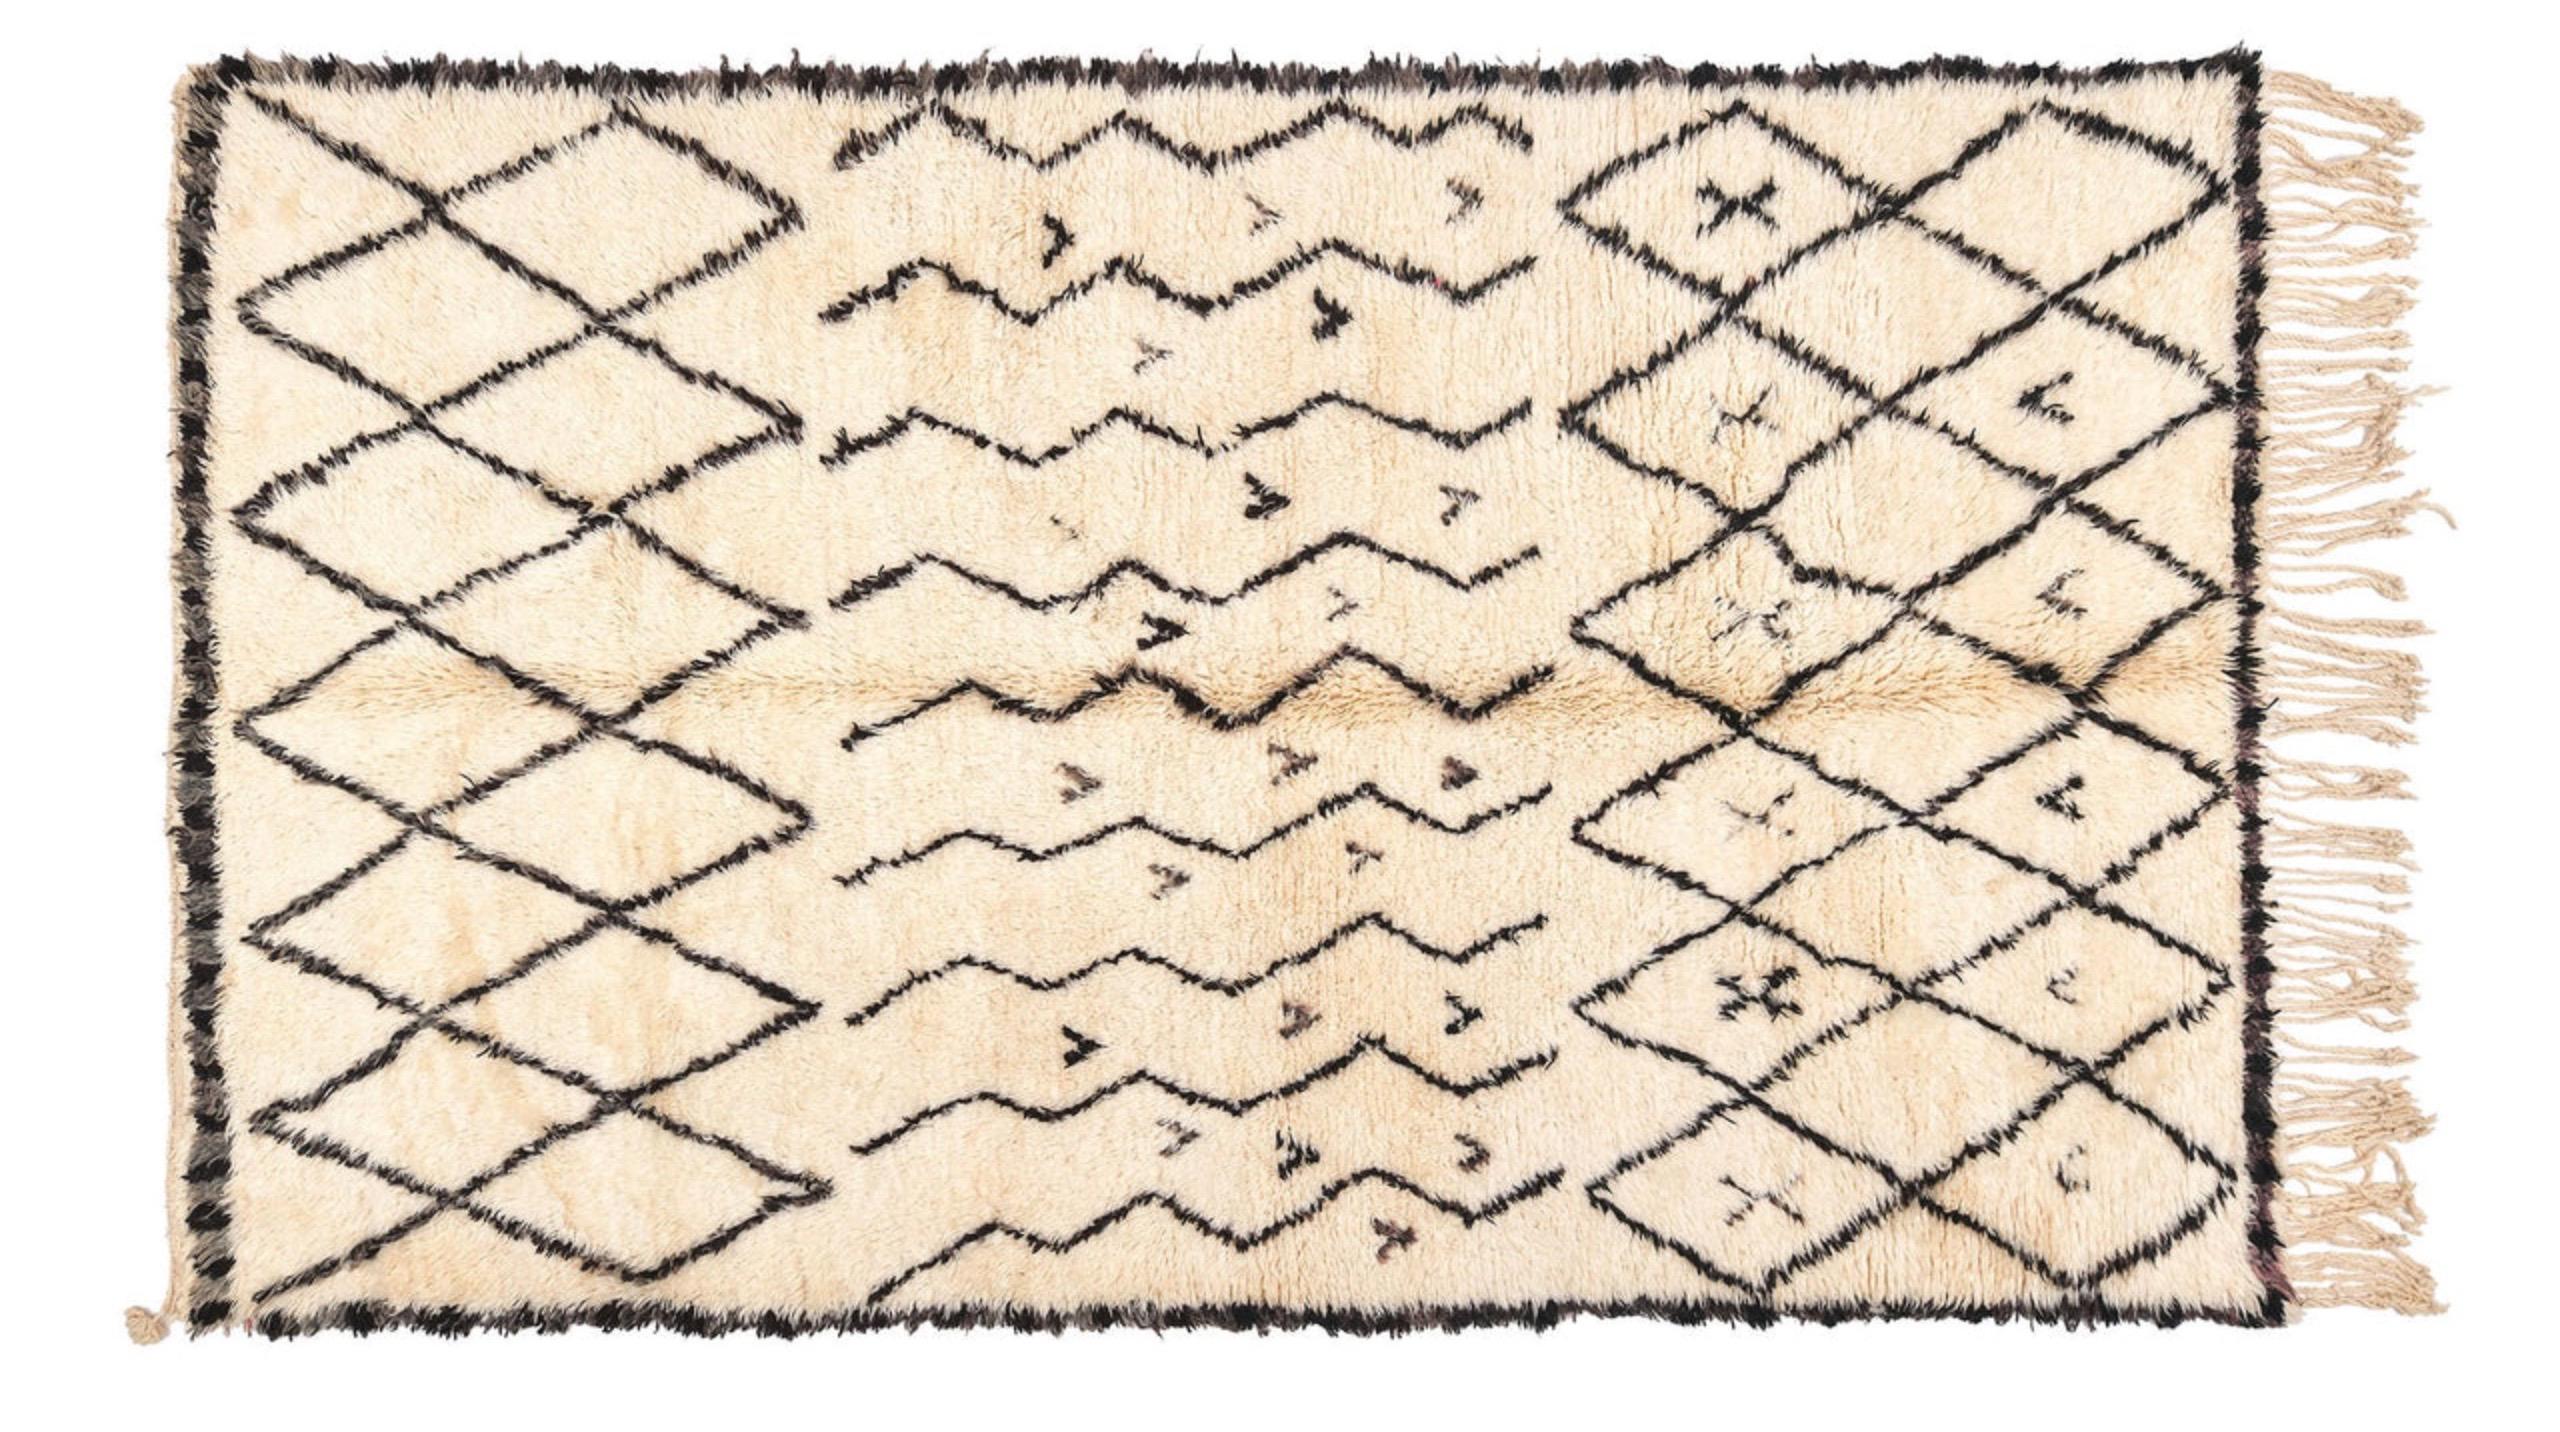 One-of-a-kind vintage Beni Orin rug, handknotted. From Middle Atlas mountains of Morocco.

Beautiful criss-cross pattern reminiscent of rugs in Alvar Aalto interiors.